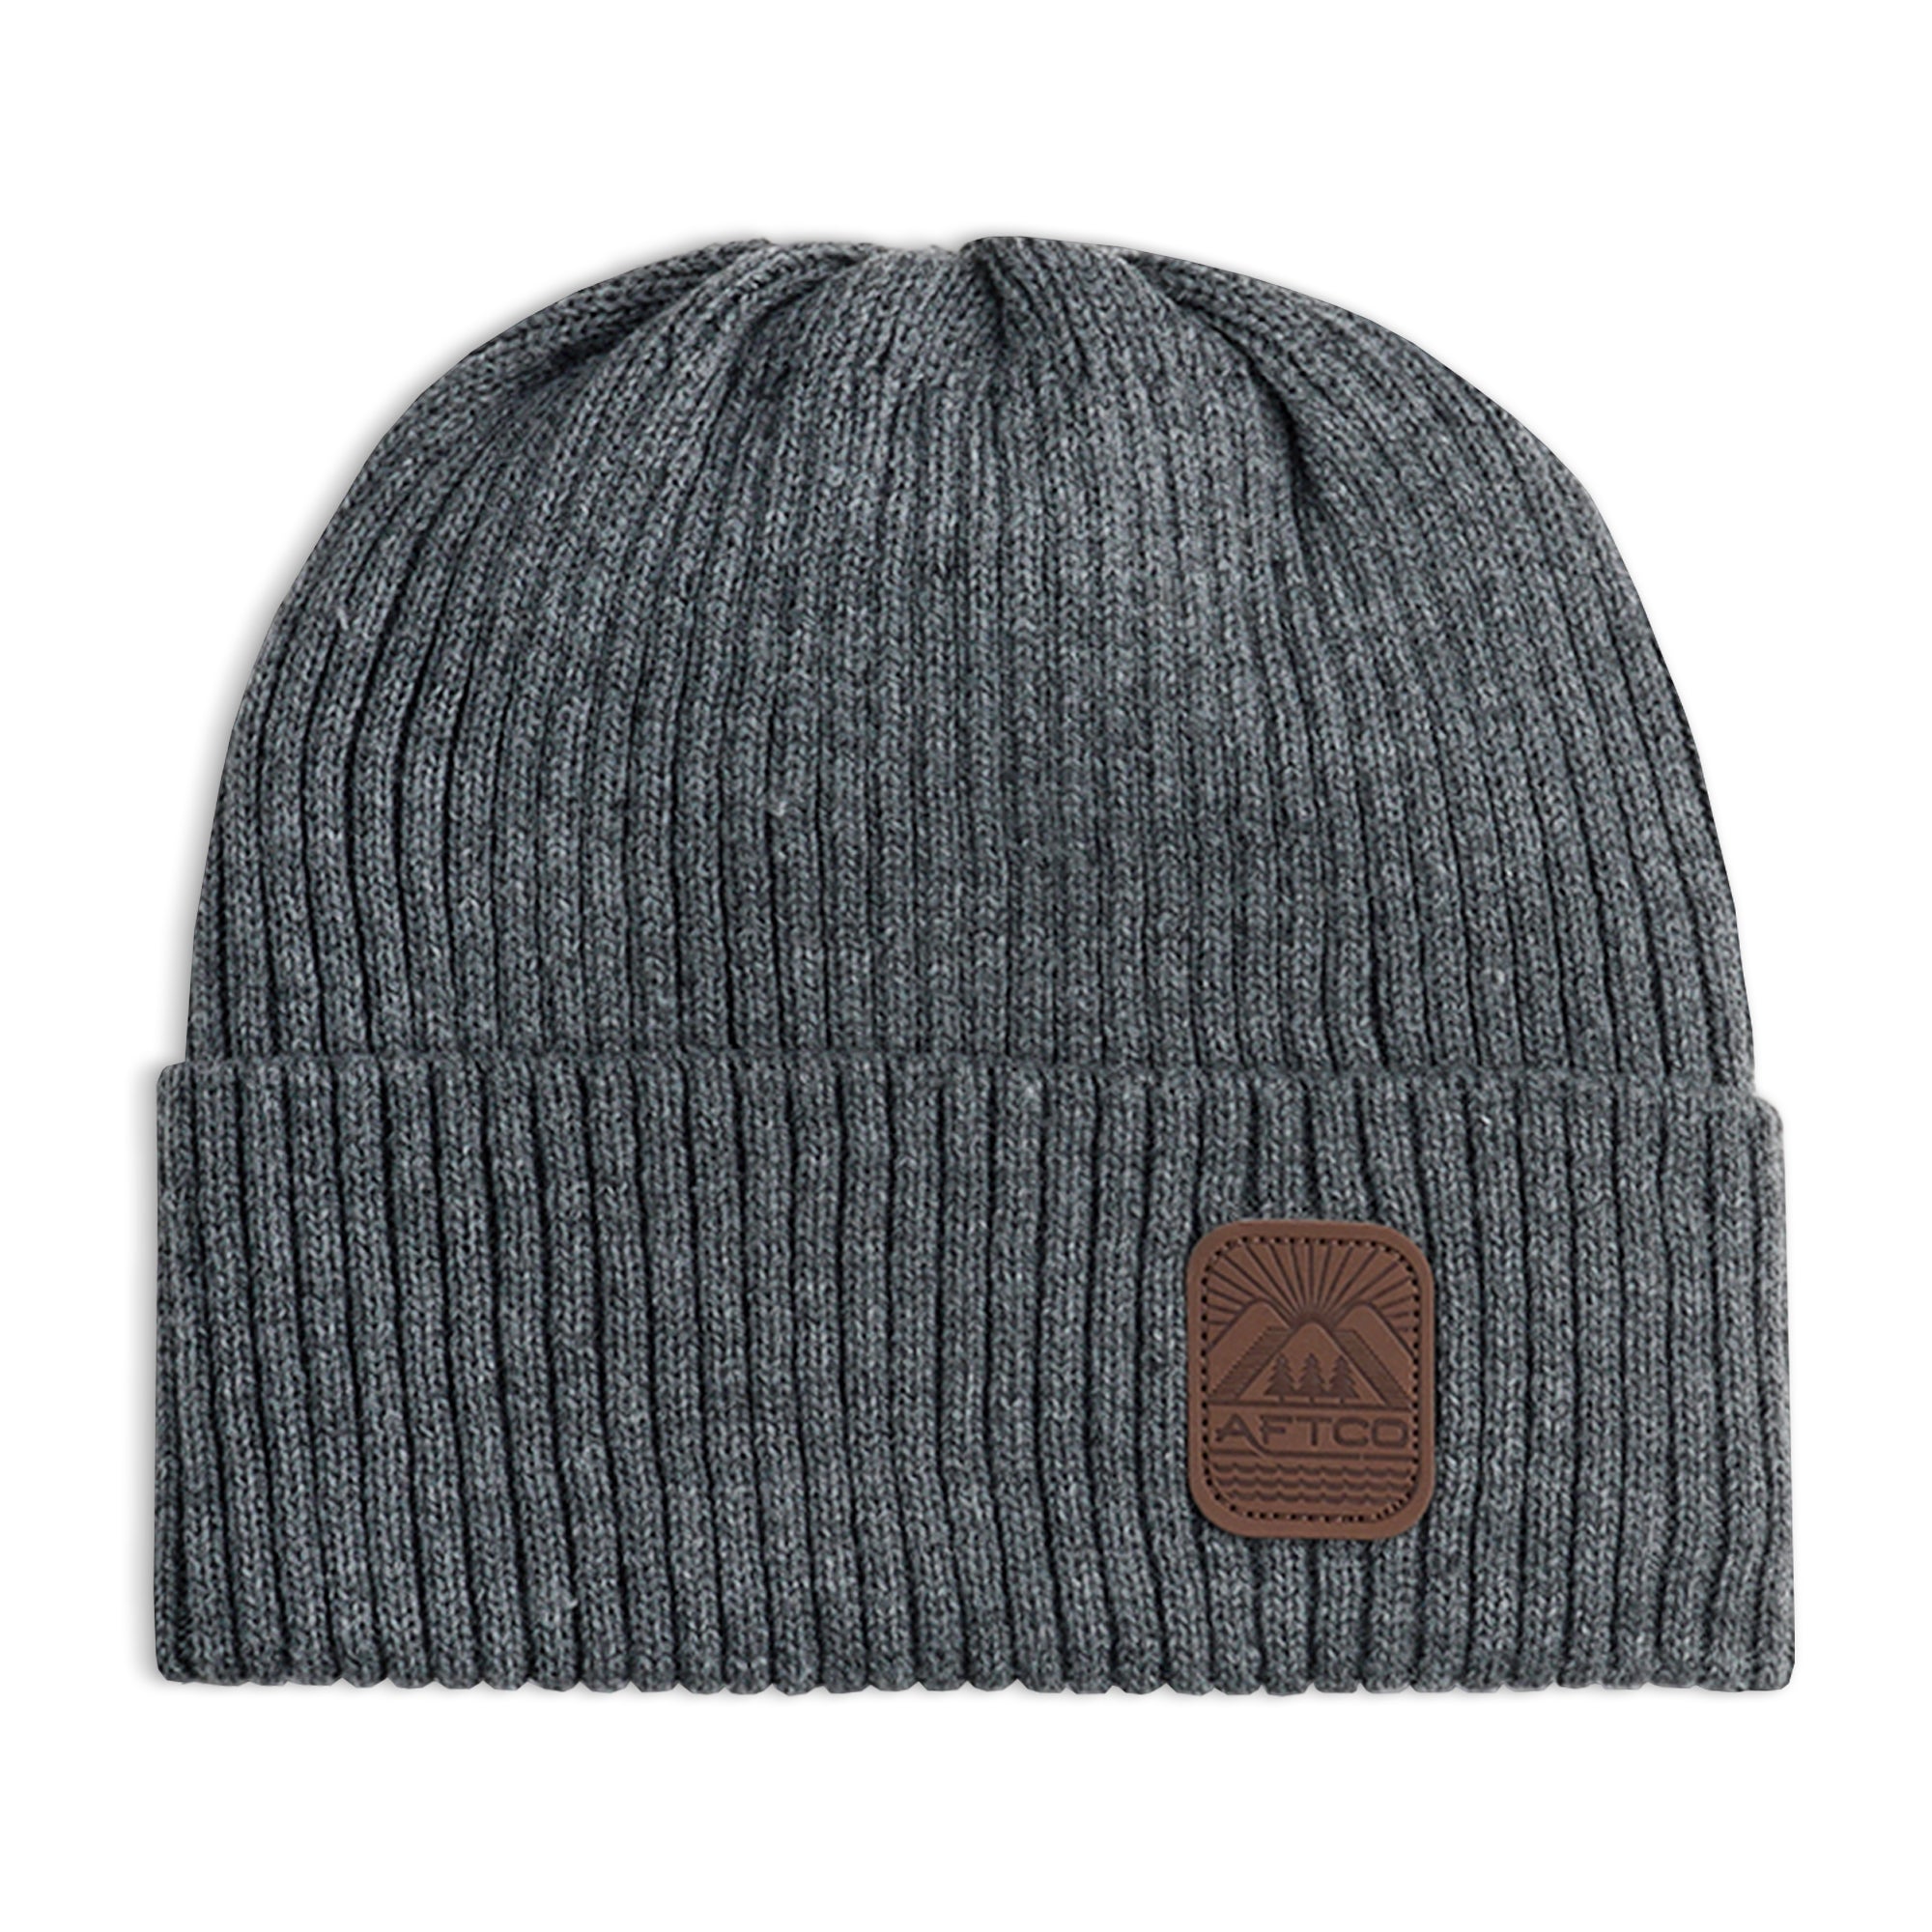 AFTCO Summit Beanie Charcoal Heather